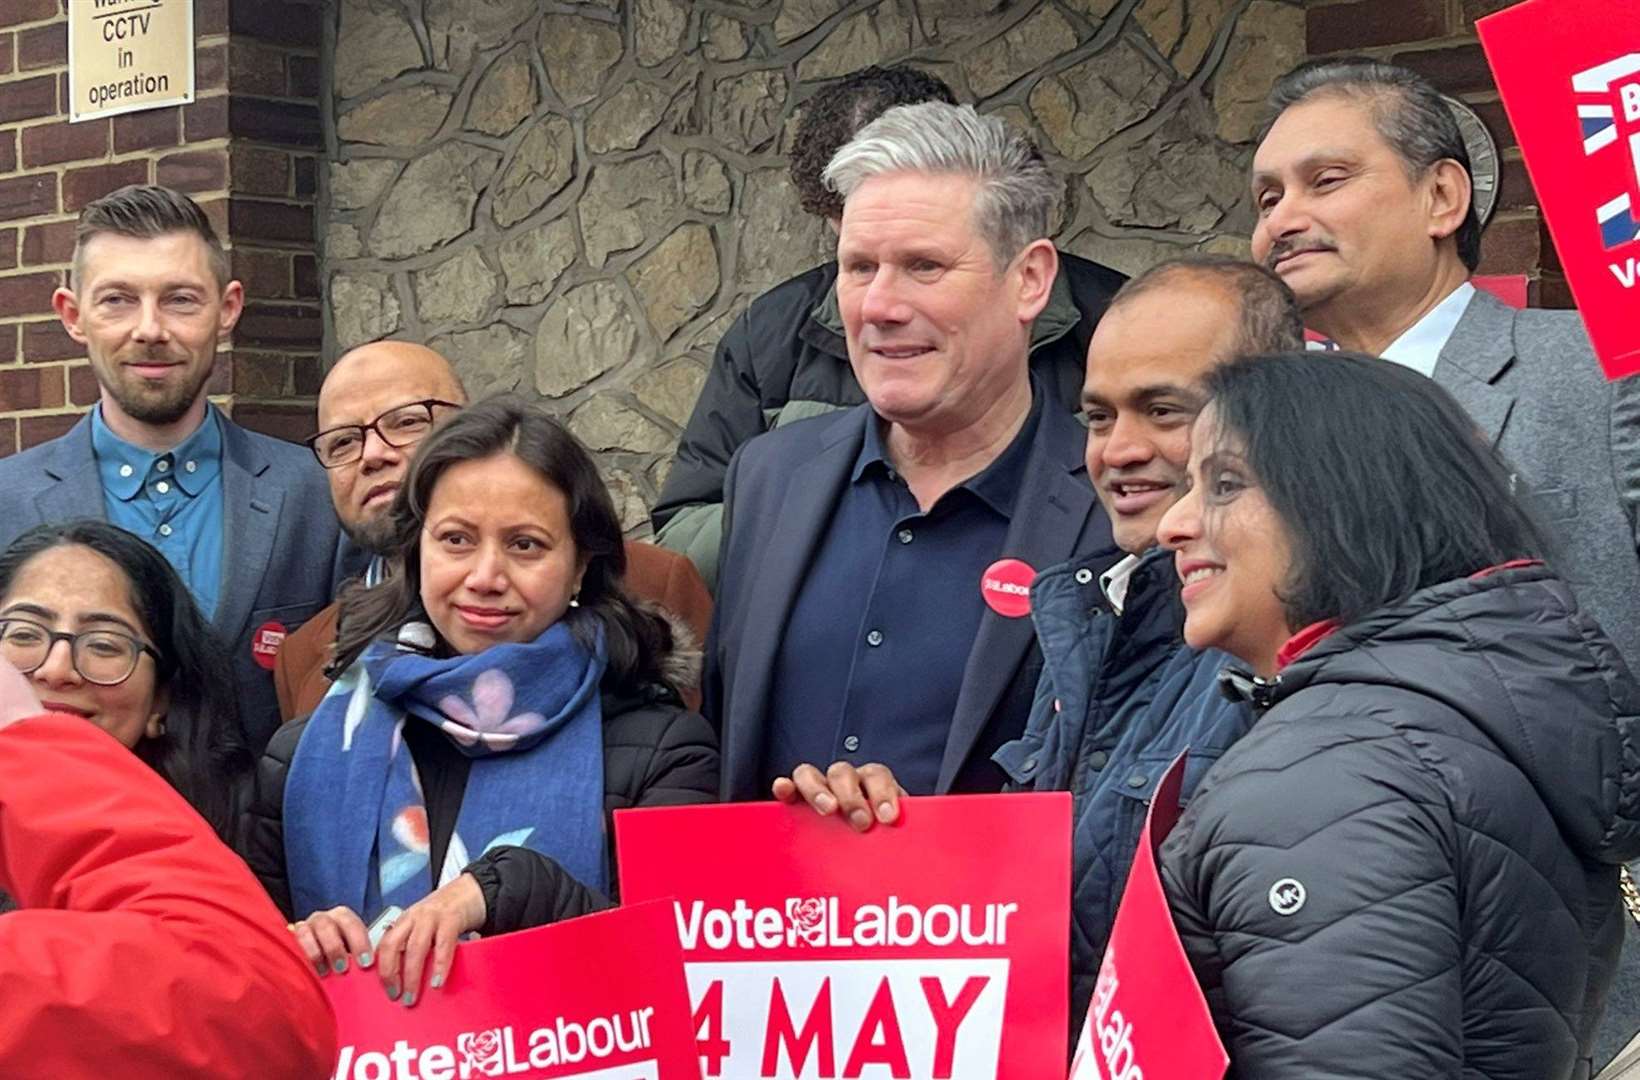 Sir Keir Starmer on a visit to support Labour candidates in Medway